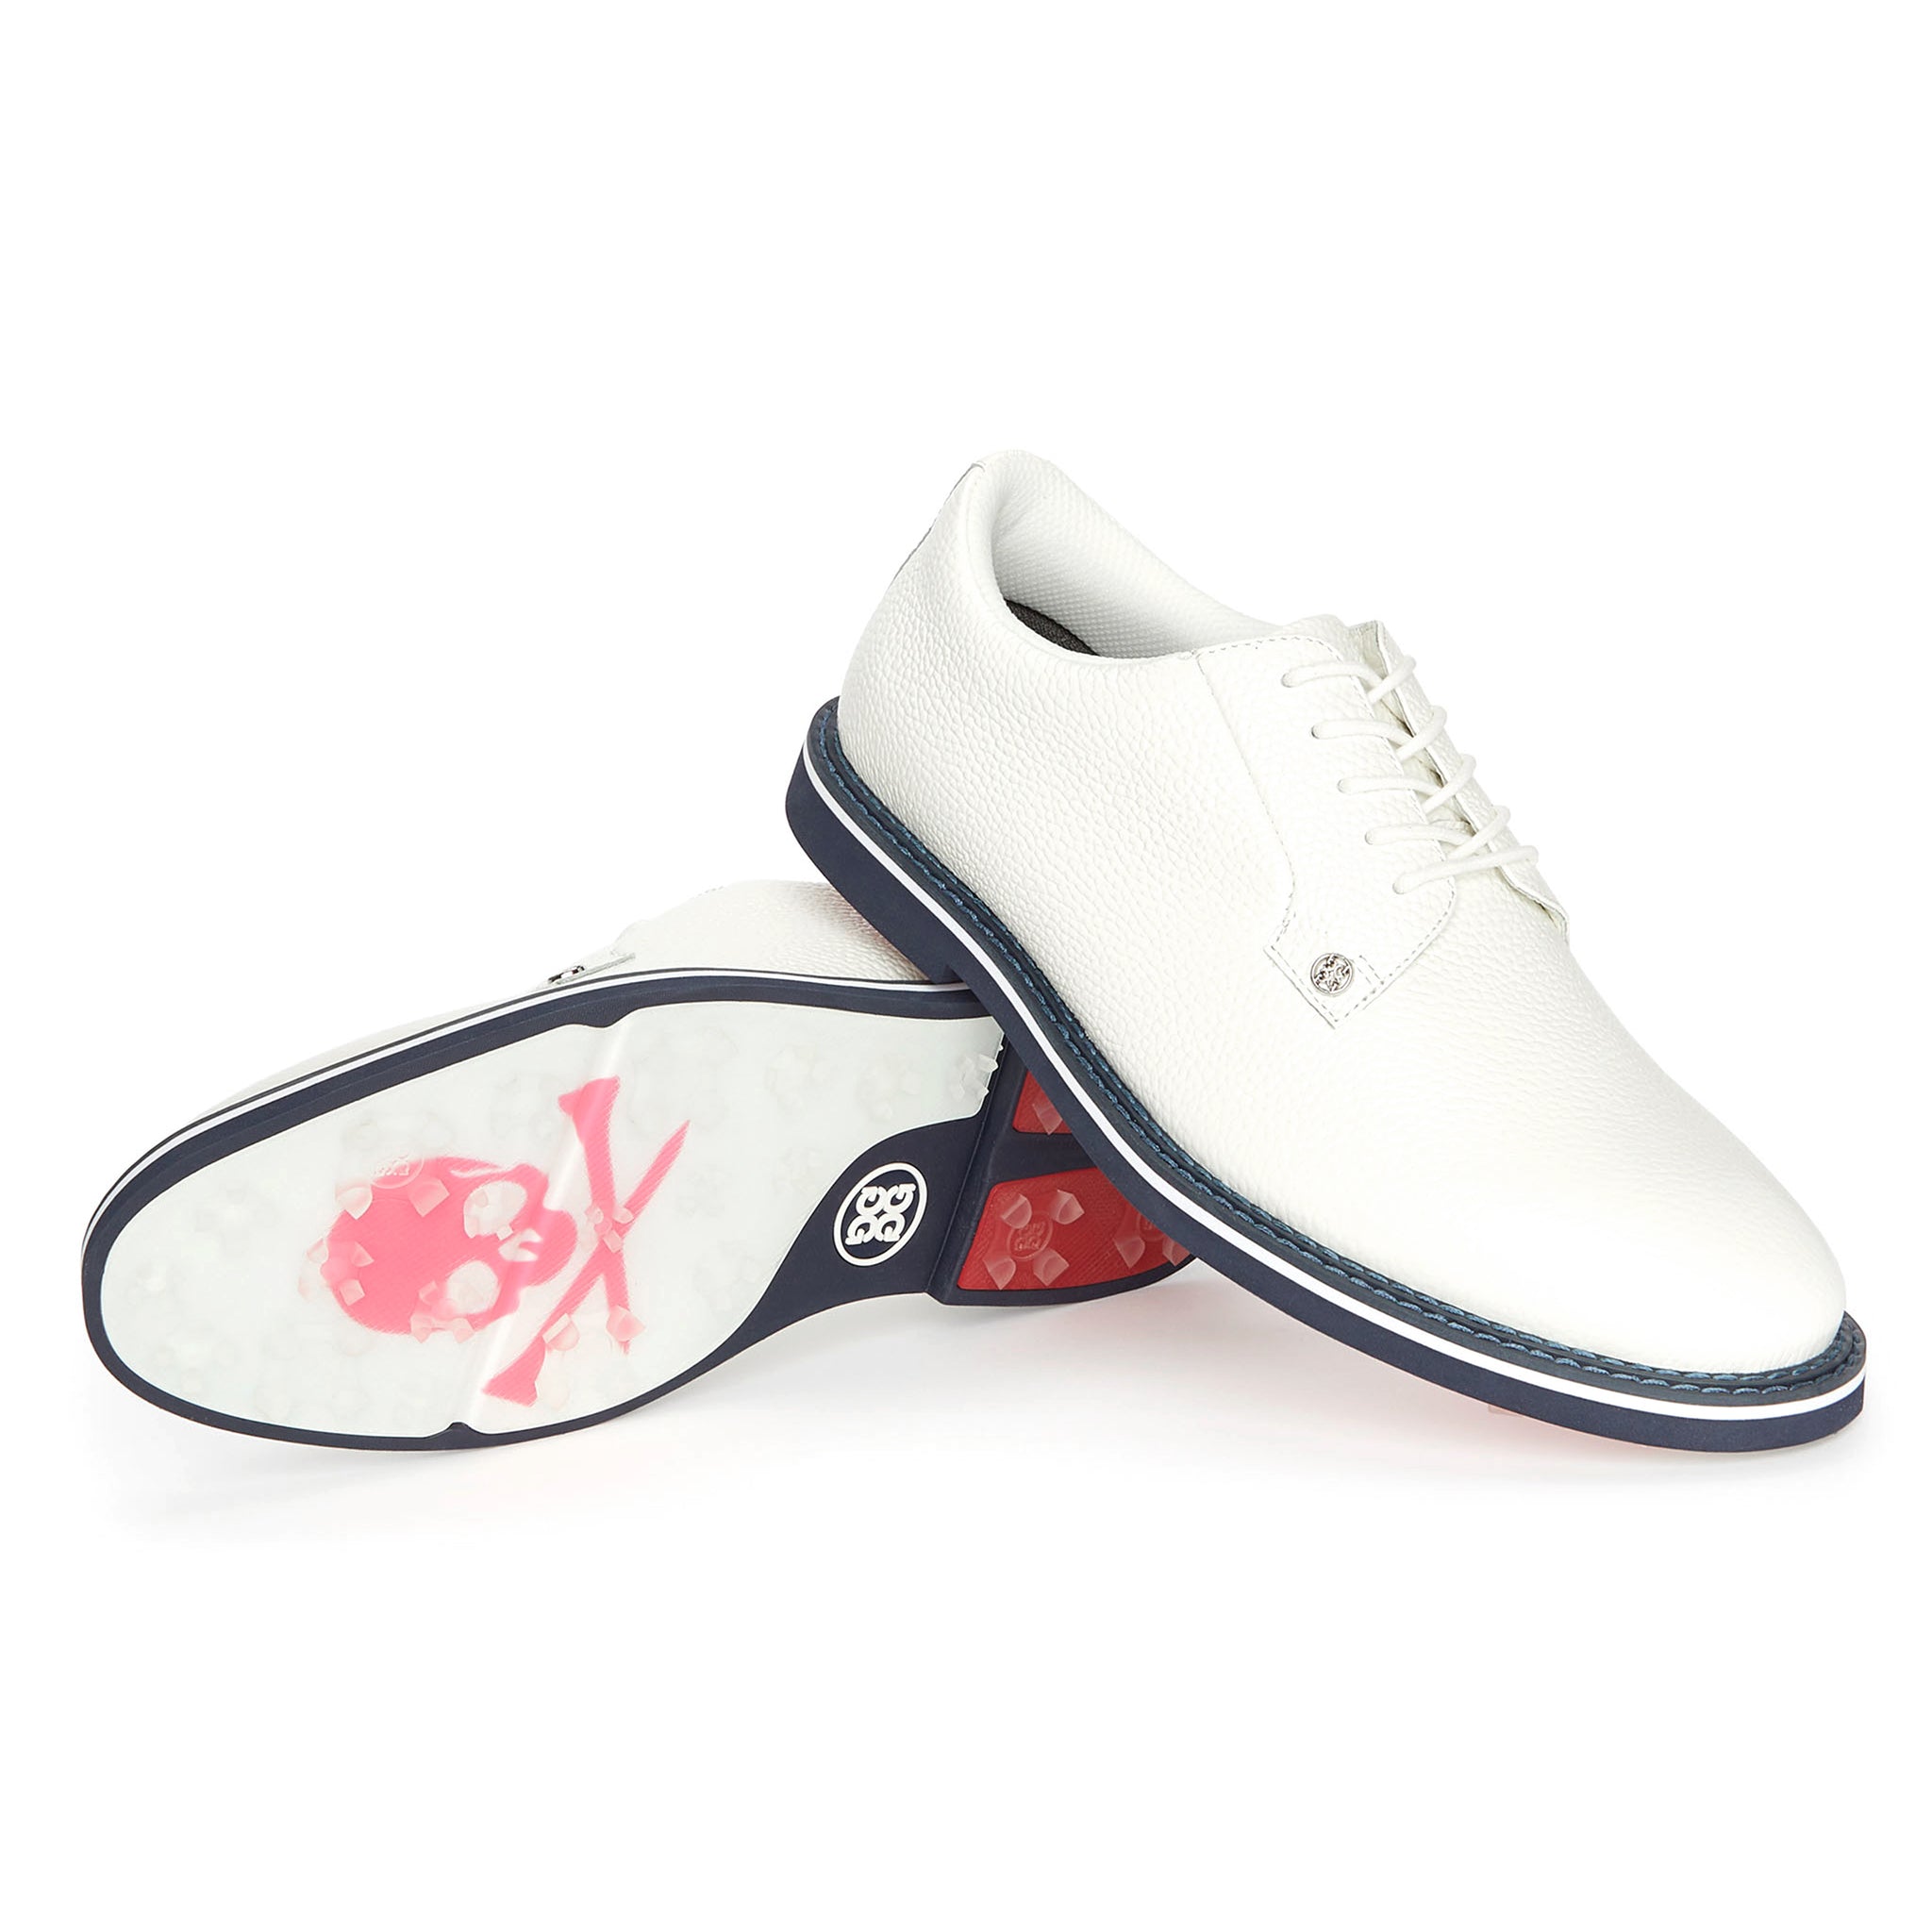 G/FORE Gallivanter Pebble Leather Golf Shoes